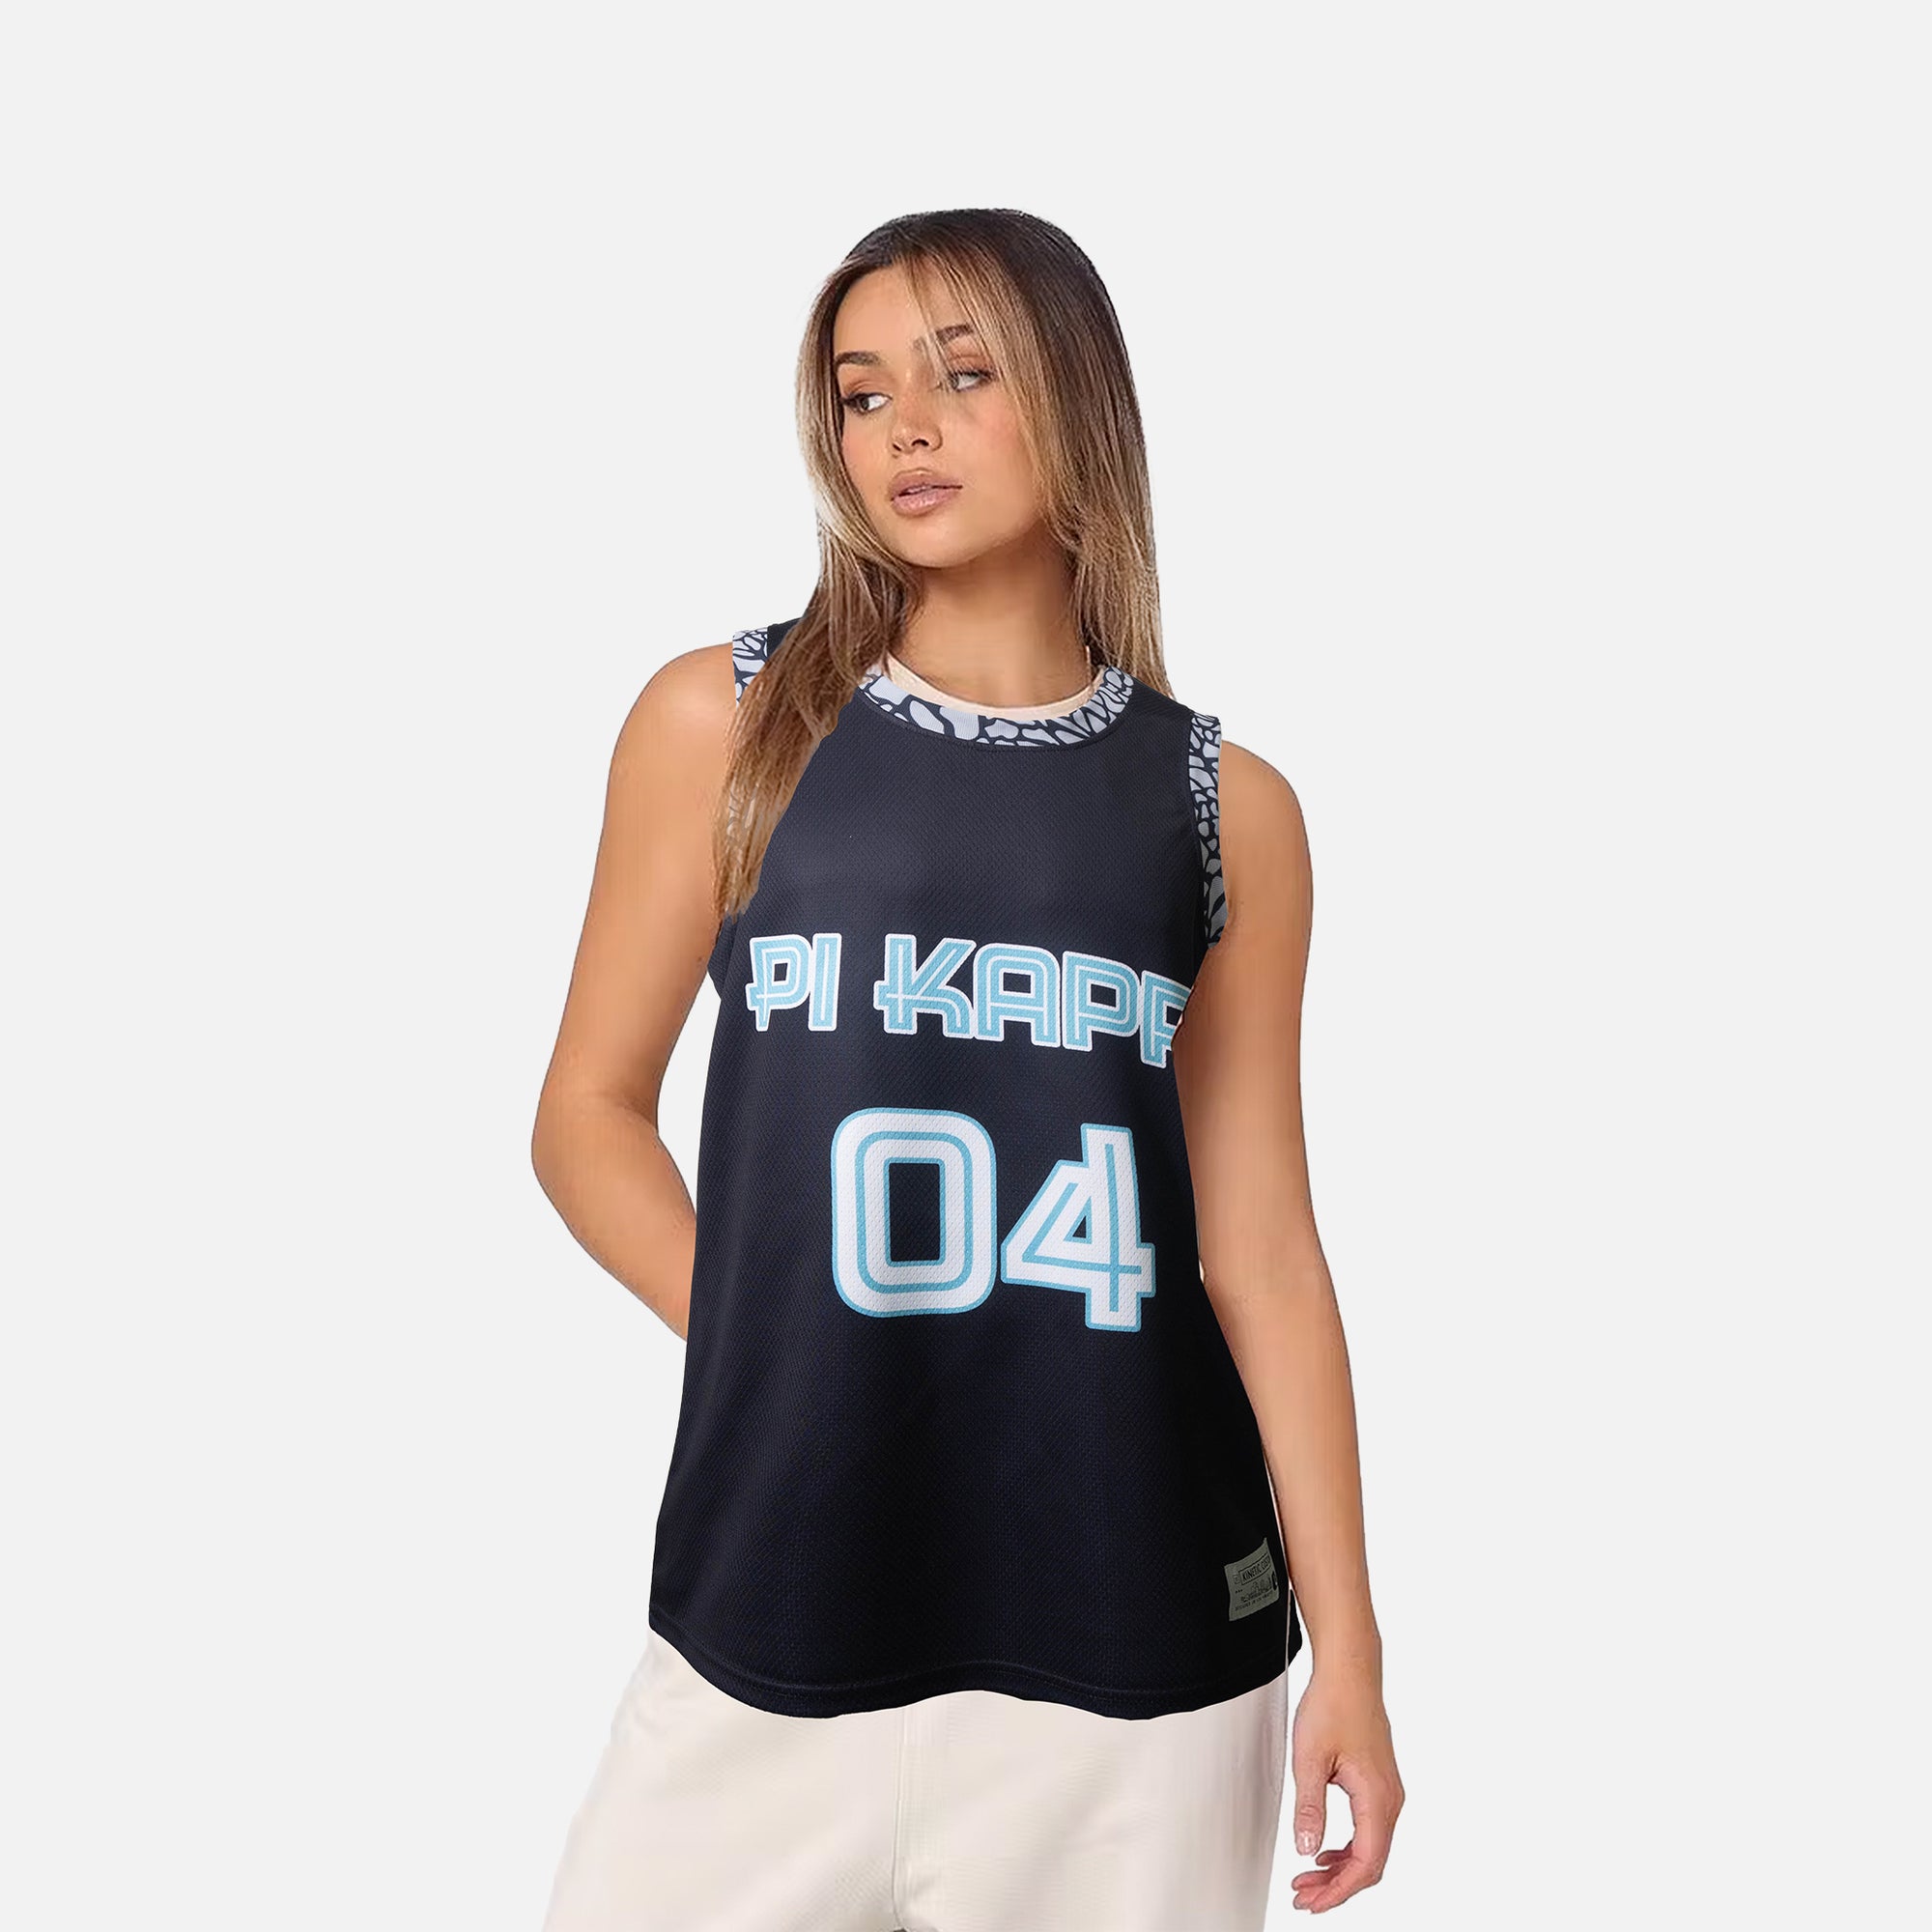 Kinetic ID - Cement Basketball Jersey